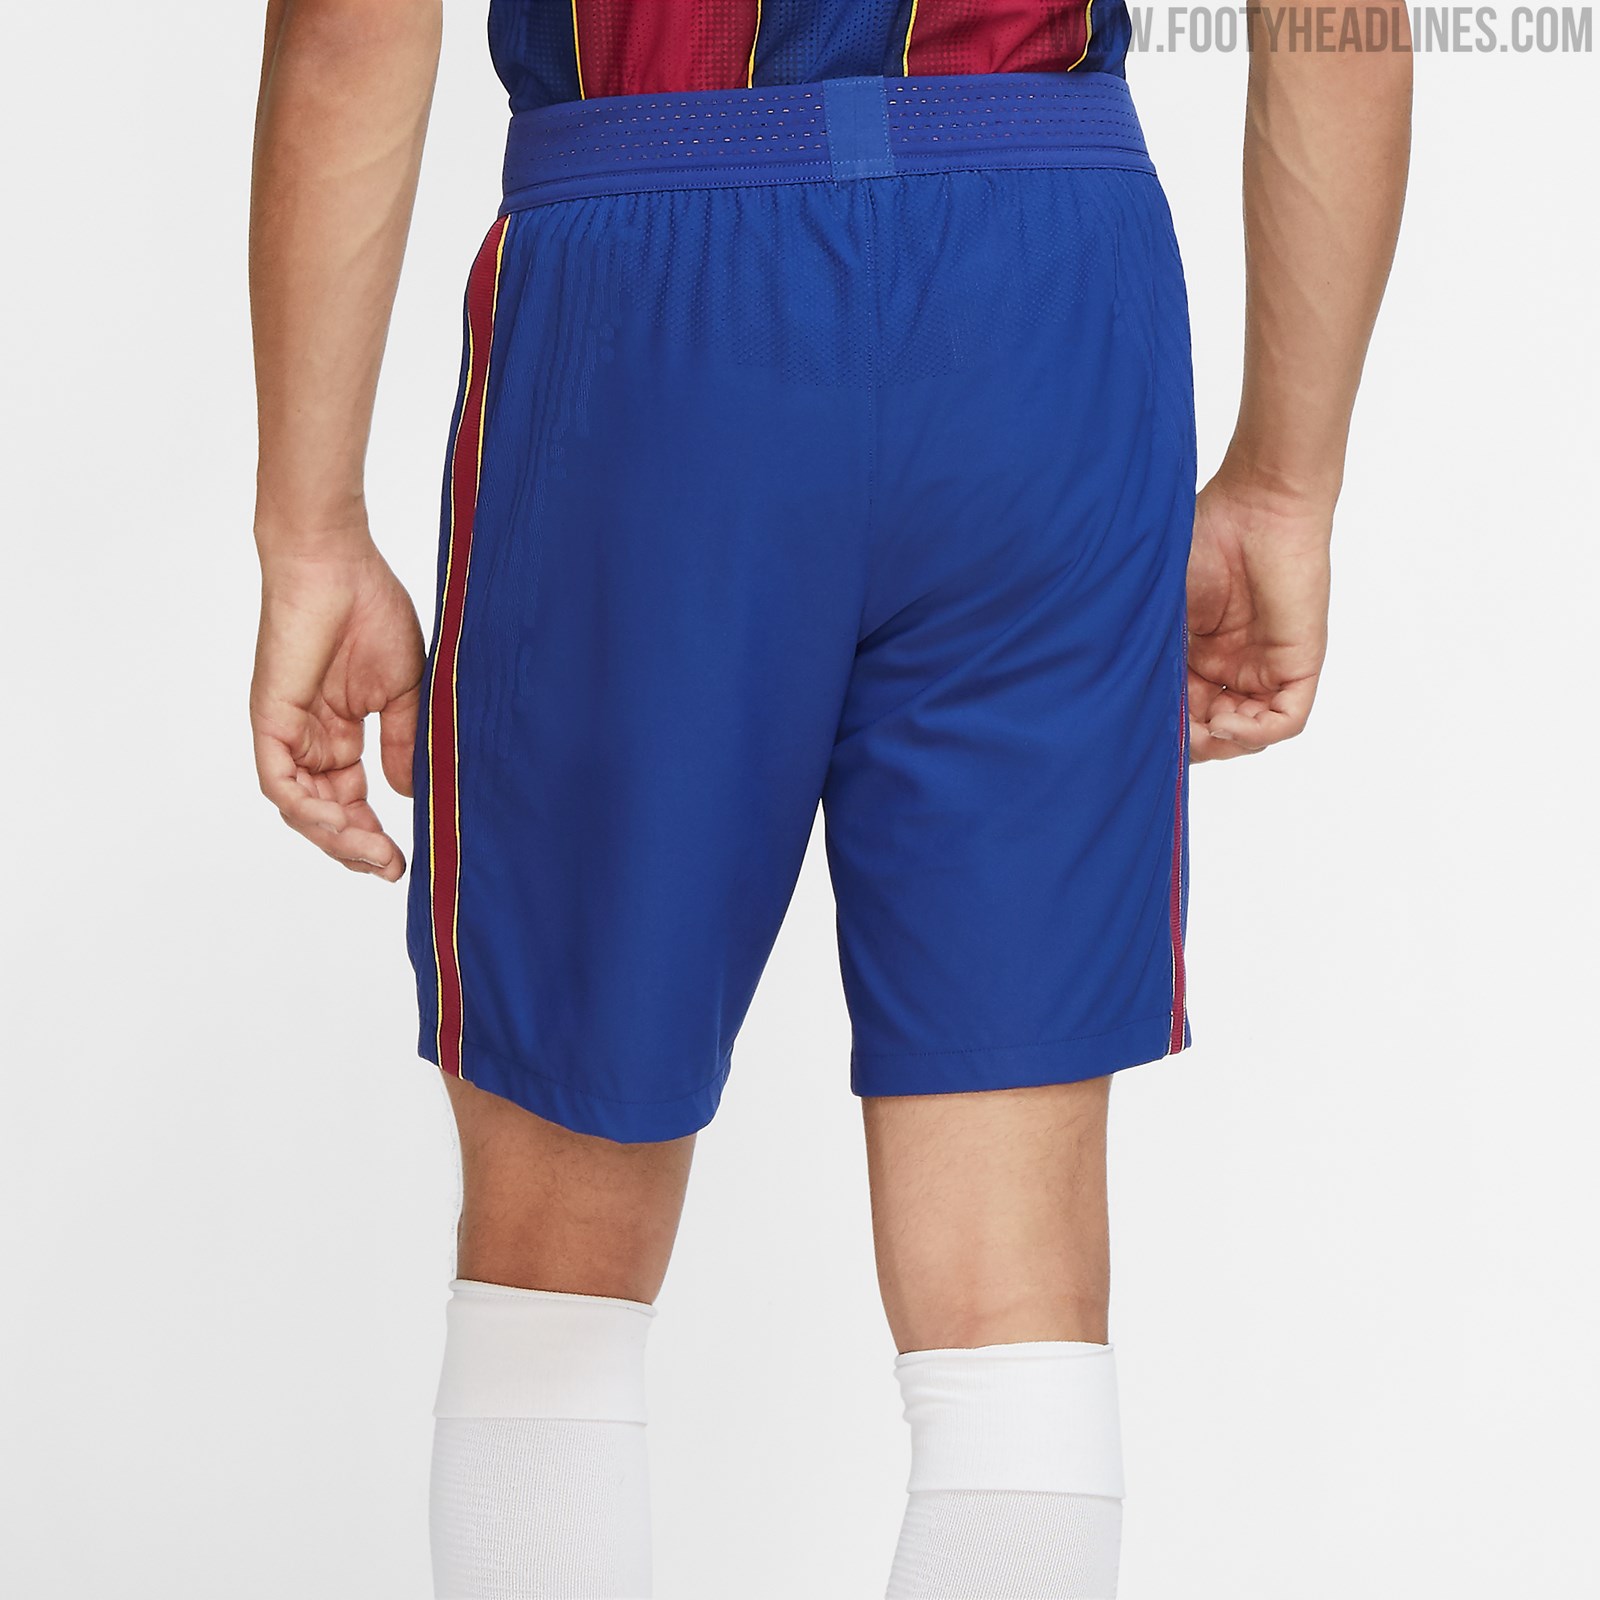 FC Barcelona 20-21 Home Kit Released - Replica Finally Available After ...